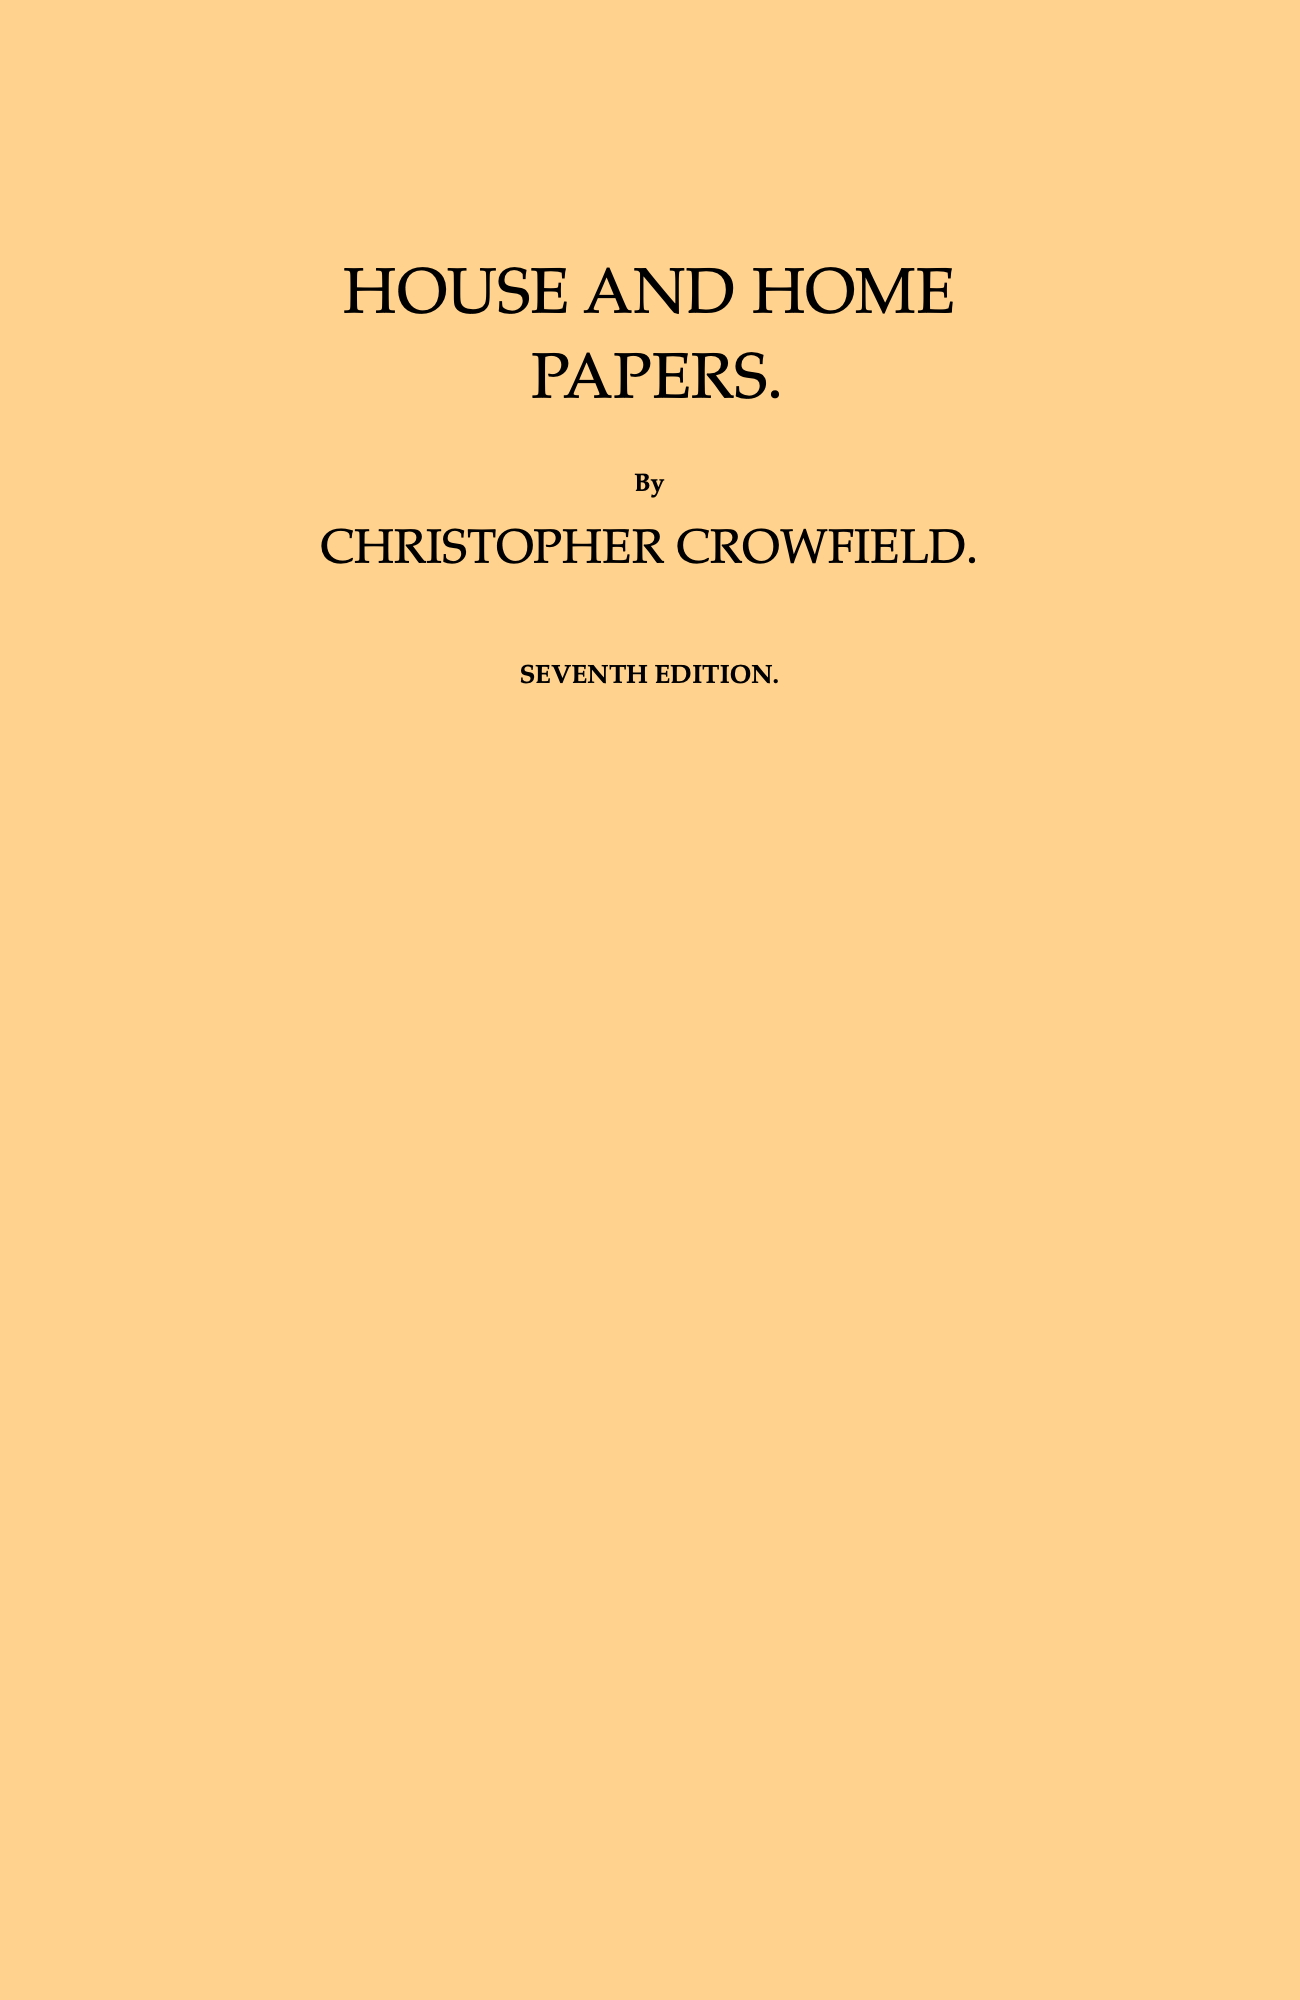 House and Home Papers, by Christopher Crowfield--A Project Gutenberg eBook pic pic